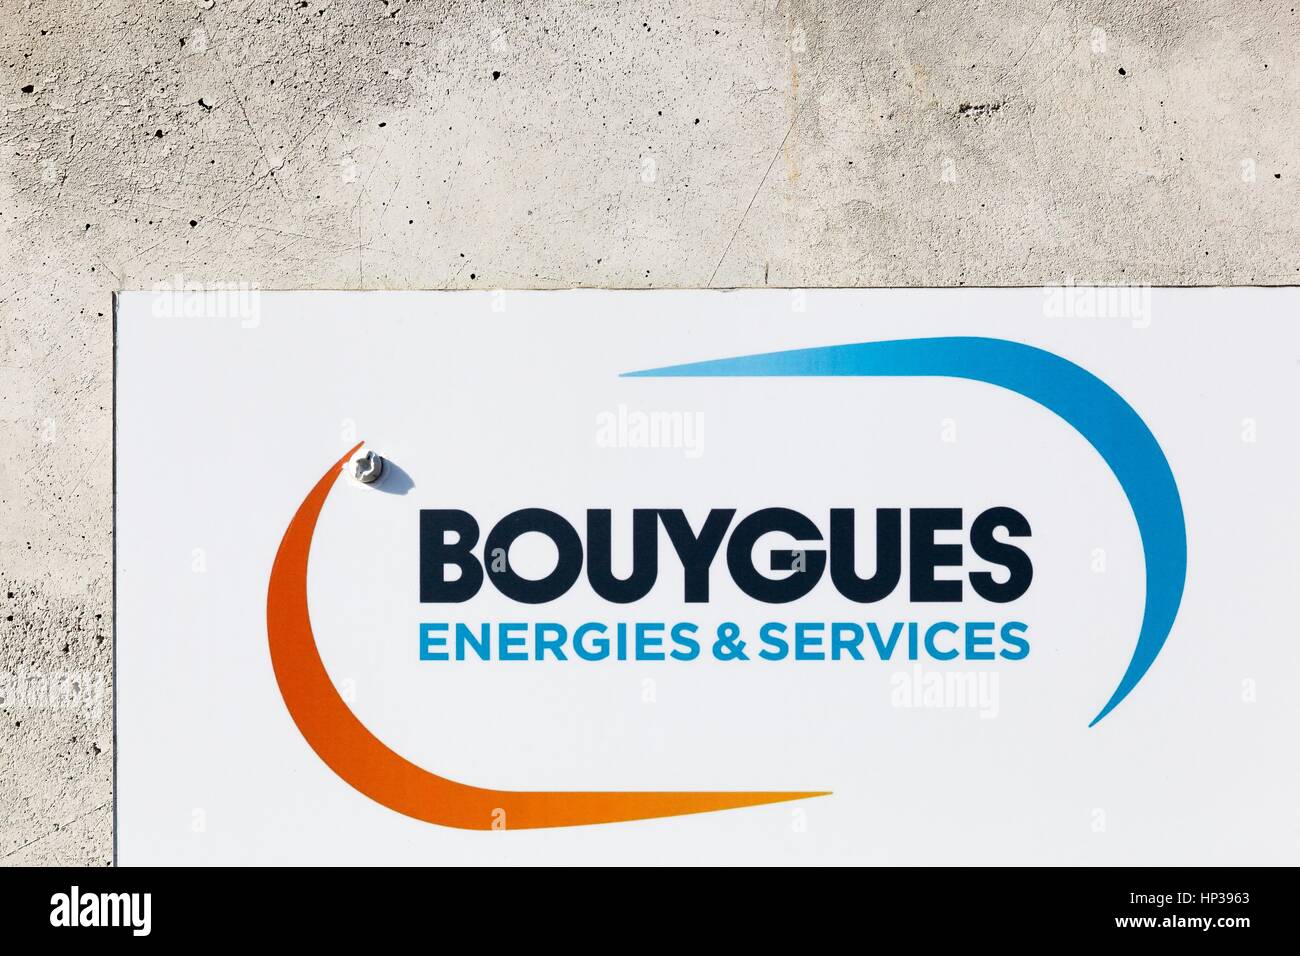 Rennes, France - October 30, 2016:Bouygues energie and services logo on a wall Stock Photo